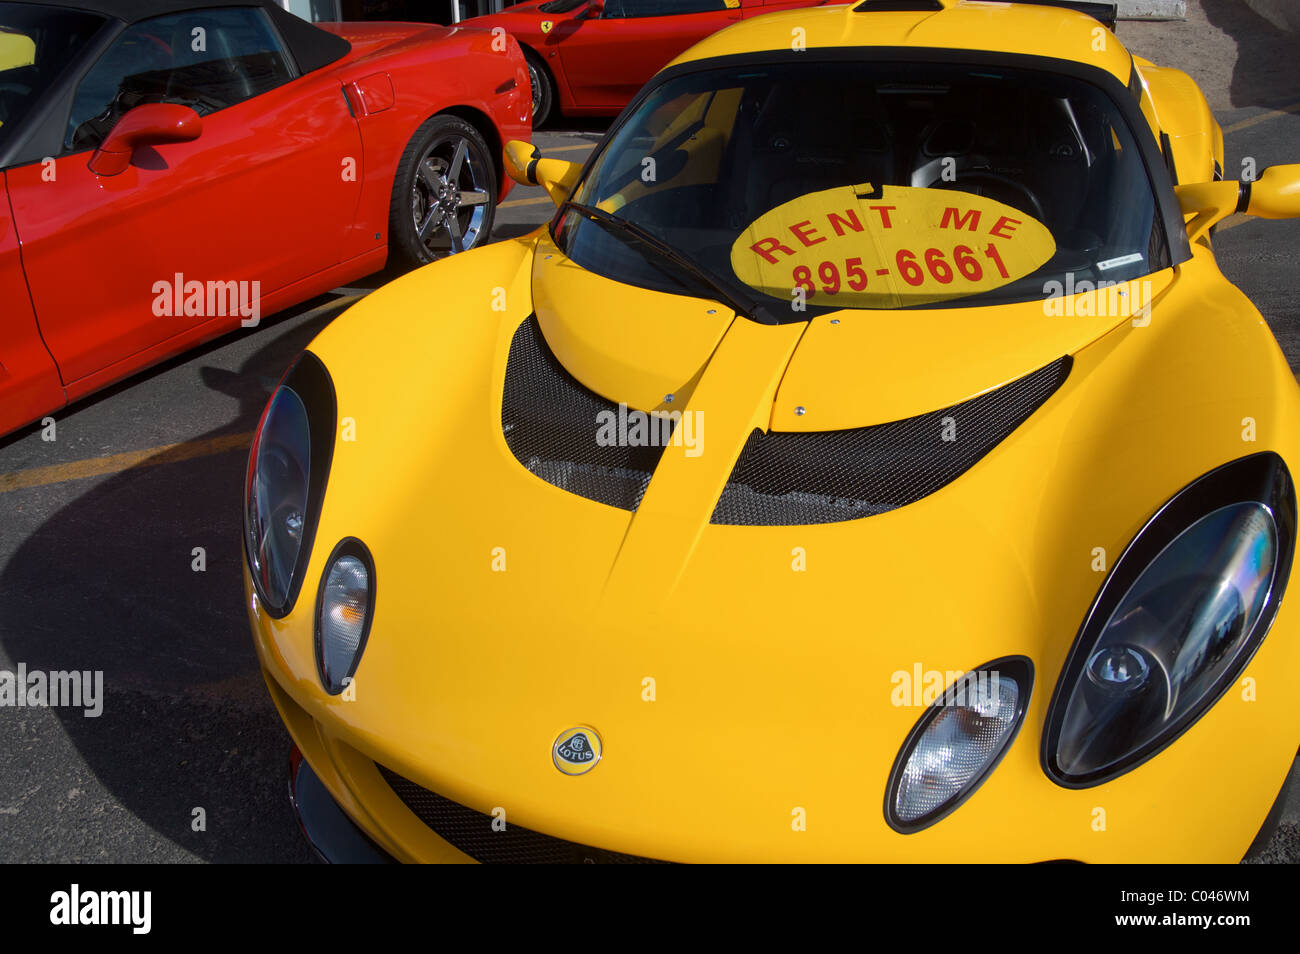 A yellow sports car for rent on the Las Vegas Strip Stock Photo